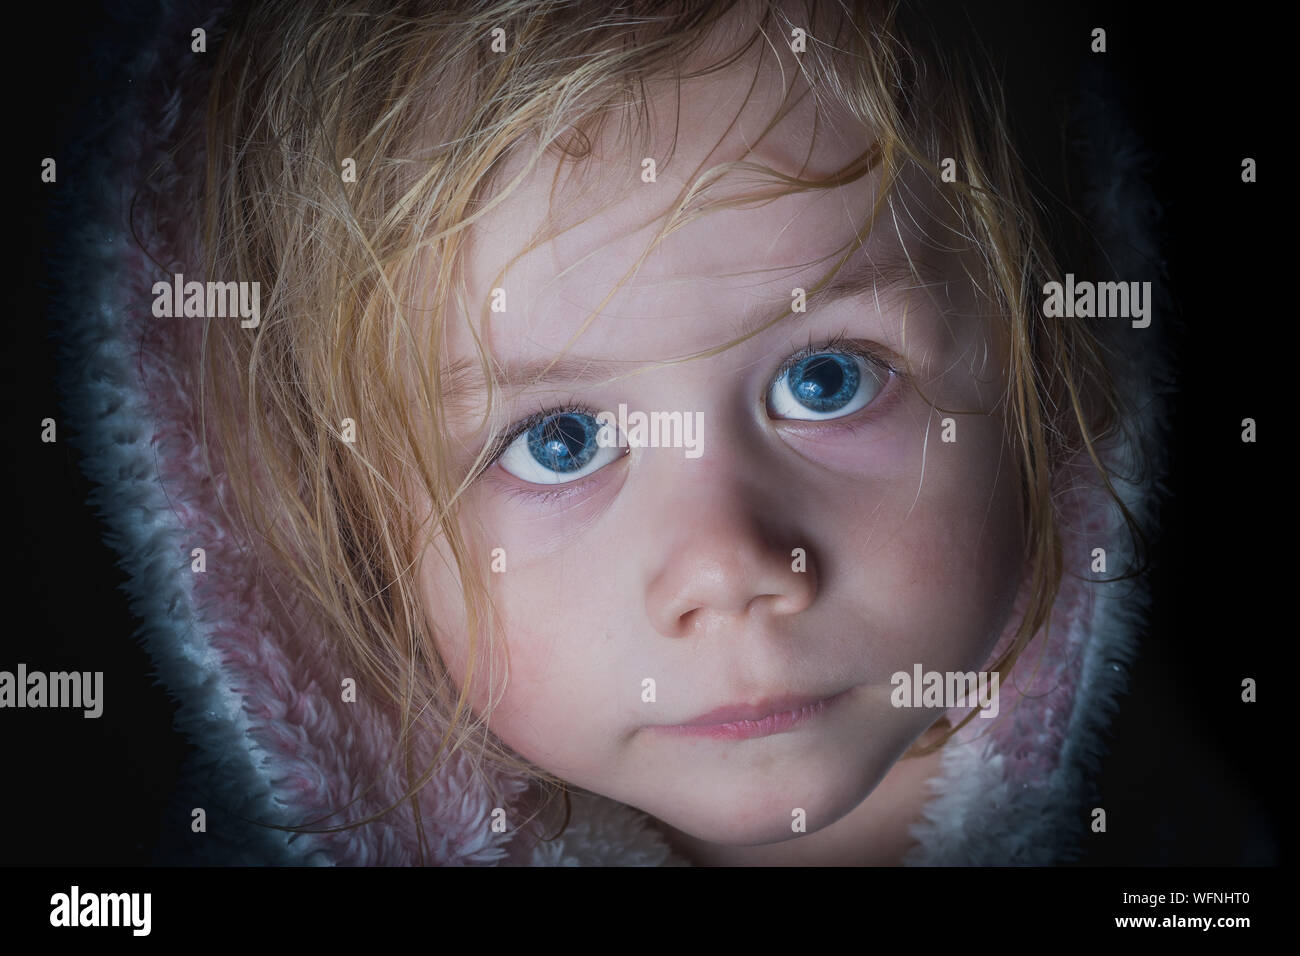 Close Up Portrait Of Cute Girl With Blue Eyes Against Black Background Stock Photo Alamy